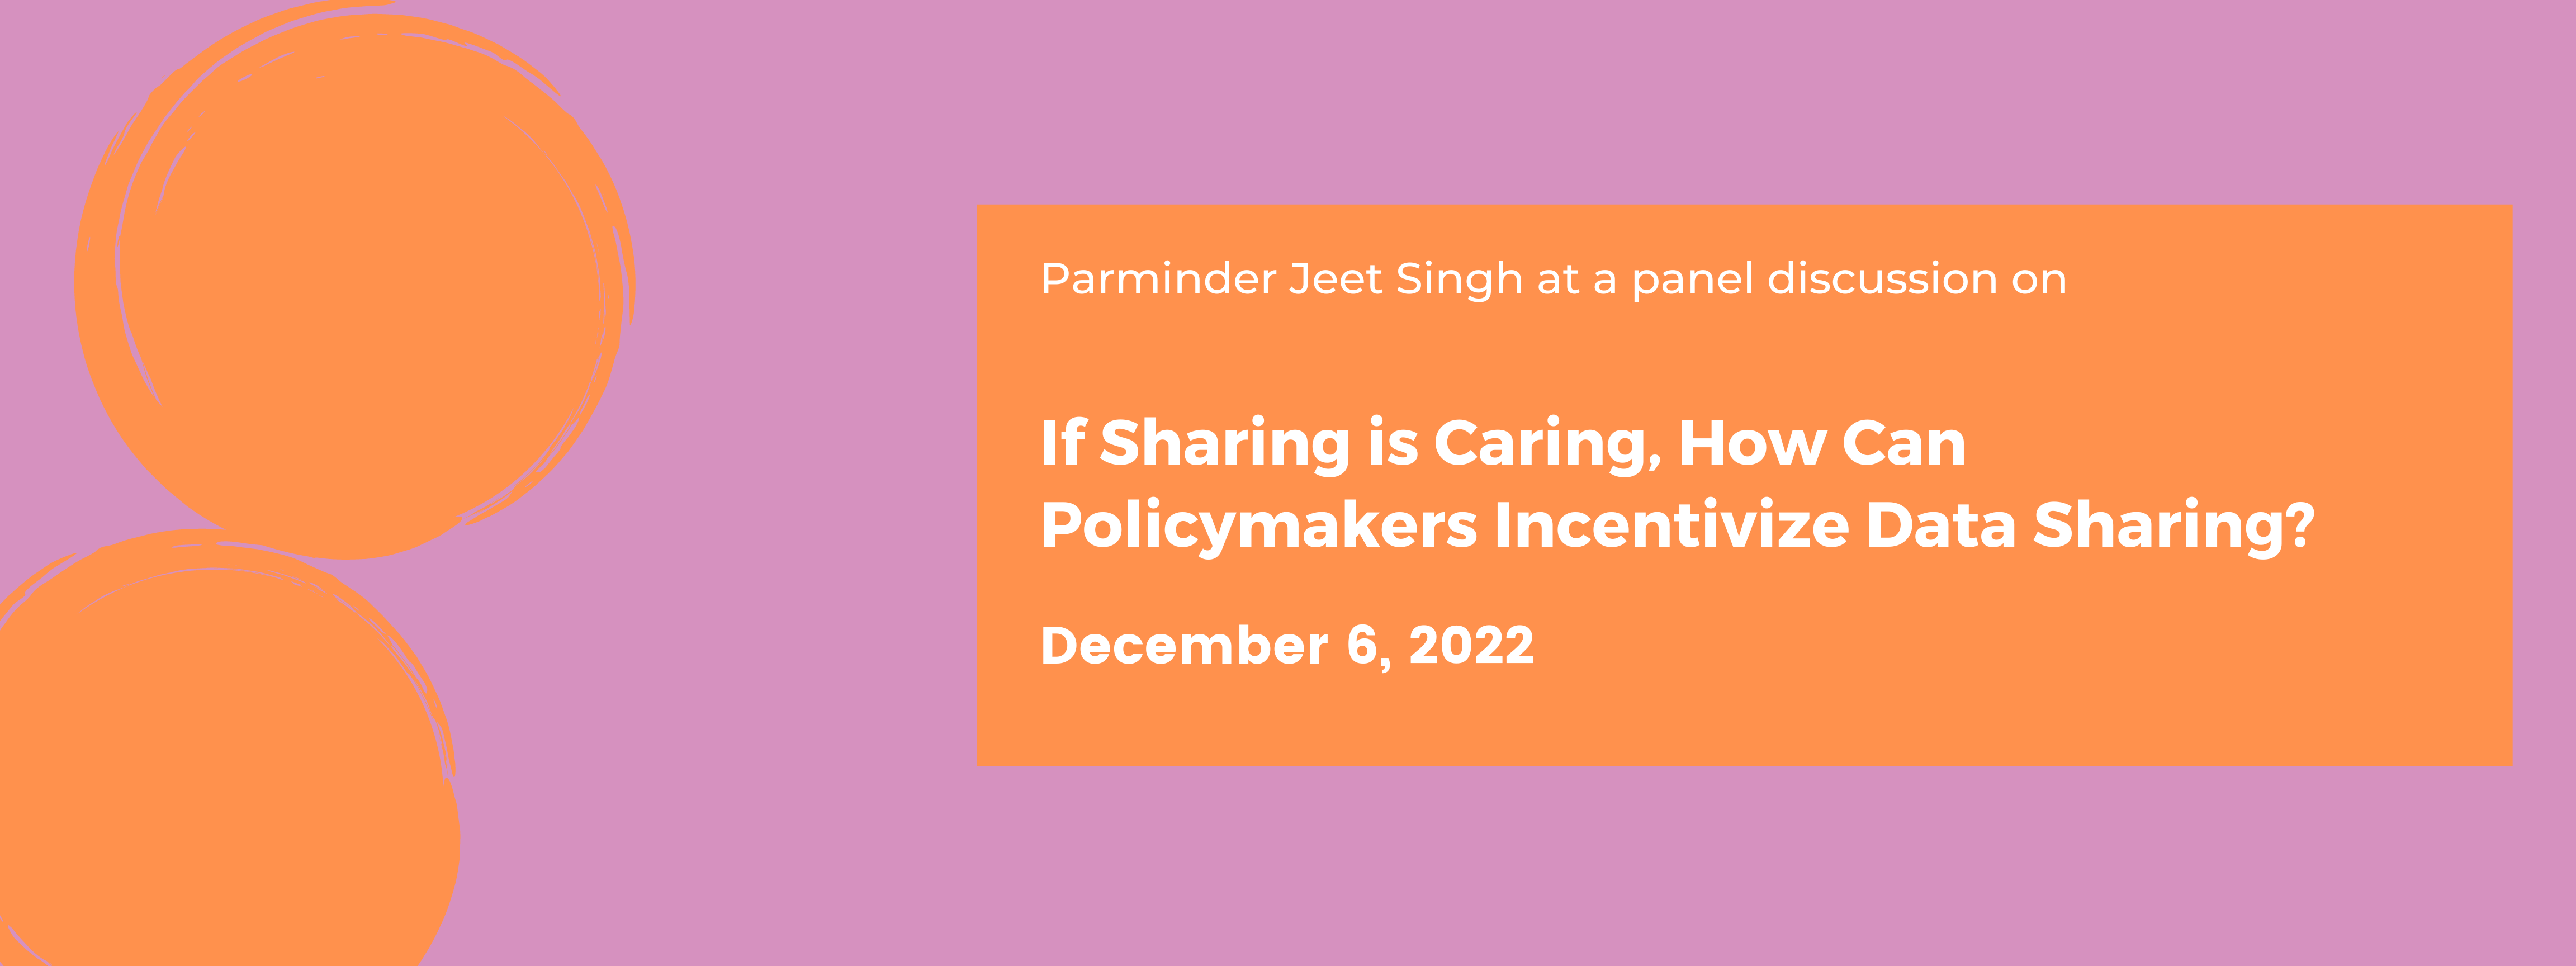 If Sharing is Caring, How Can Policymakers Incentivize Data Sharing? 